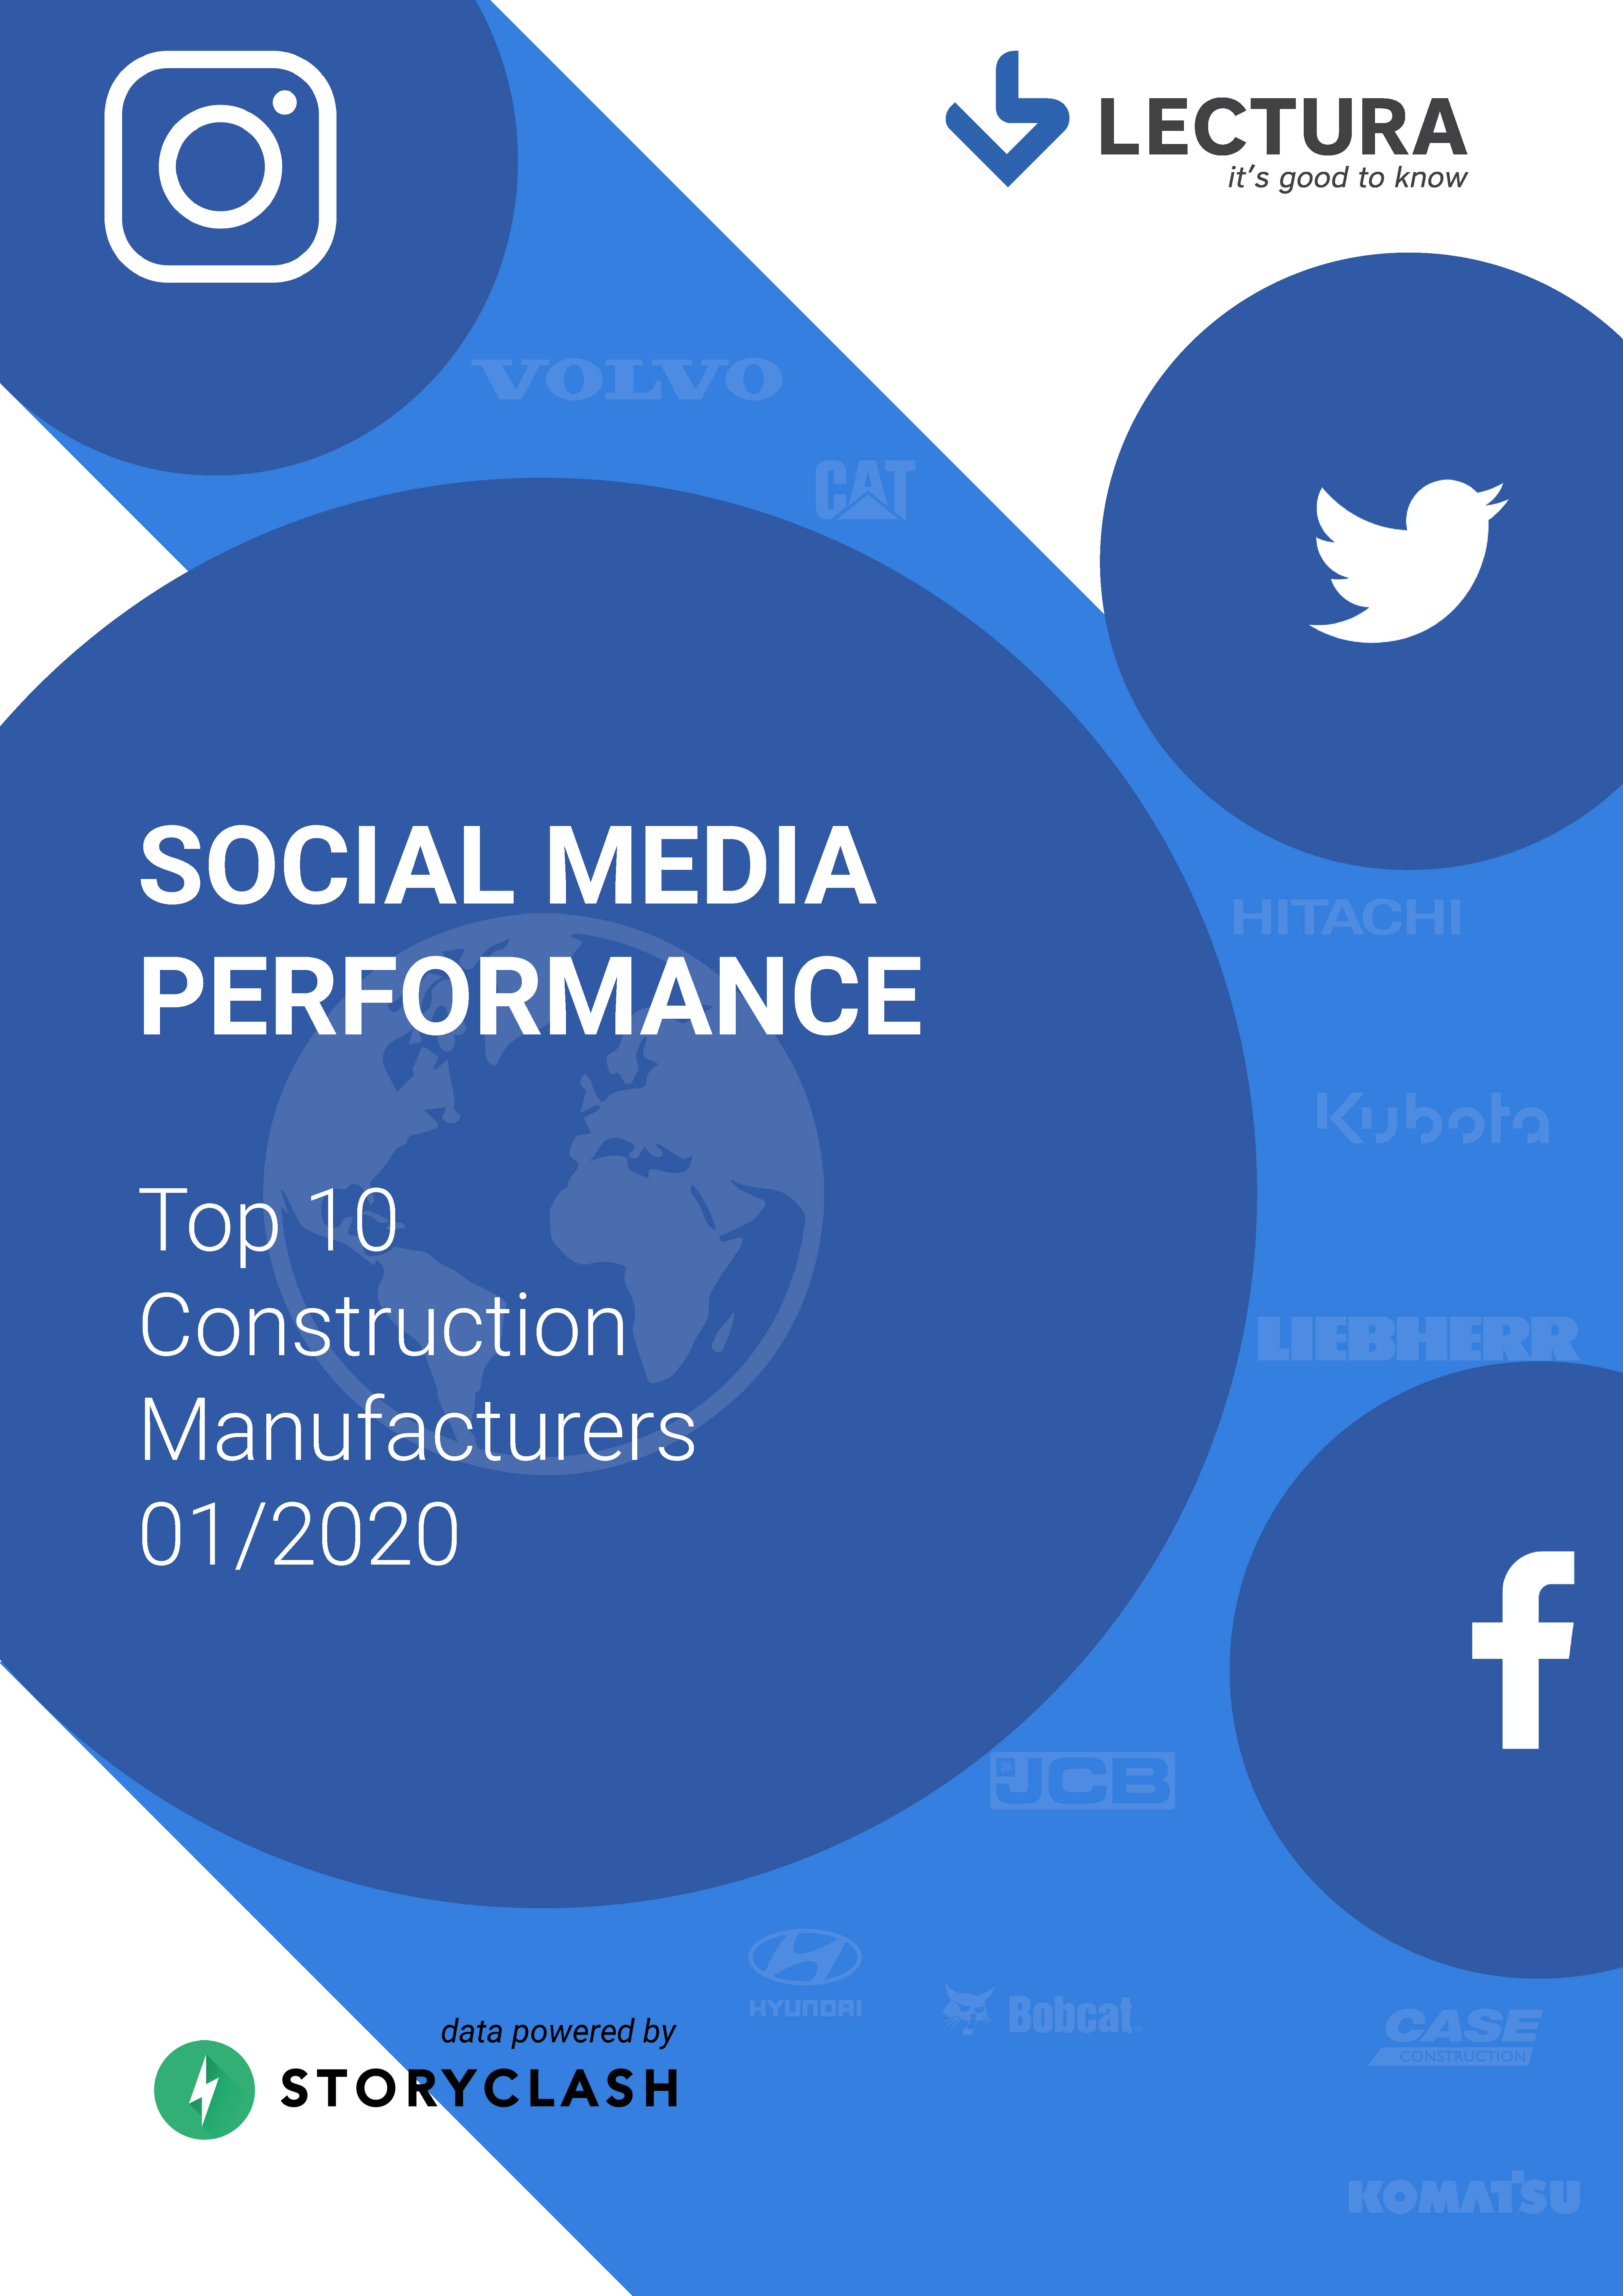 Social media performance within the construction industry